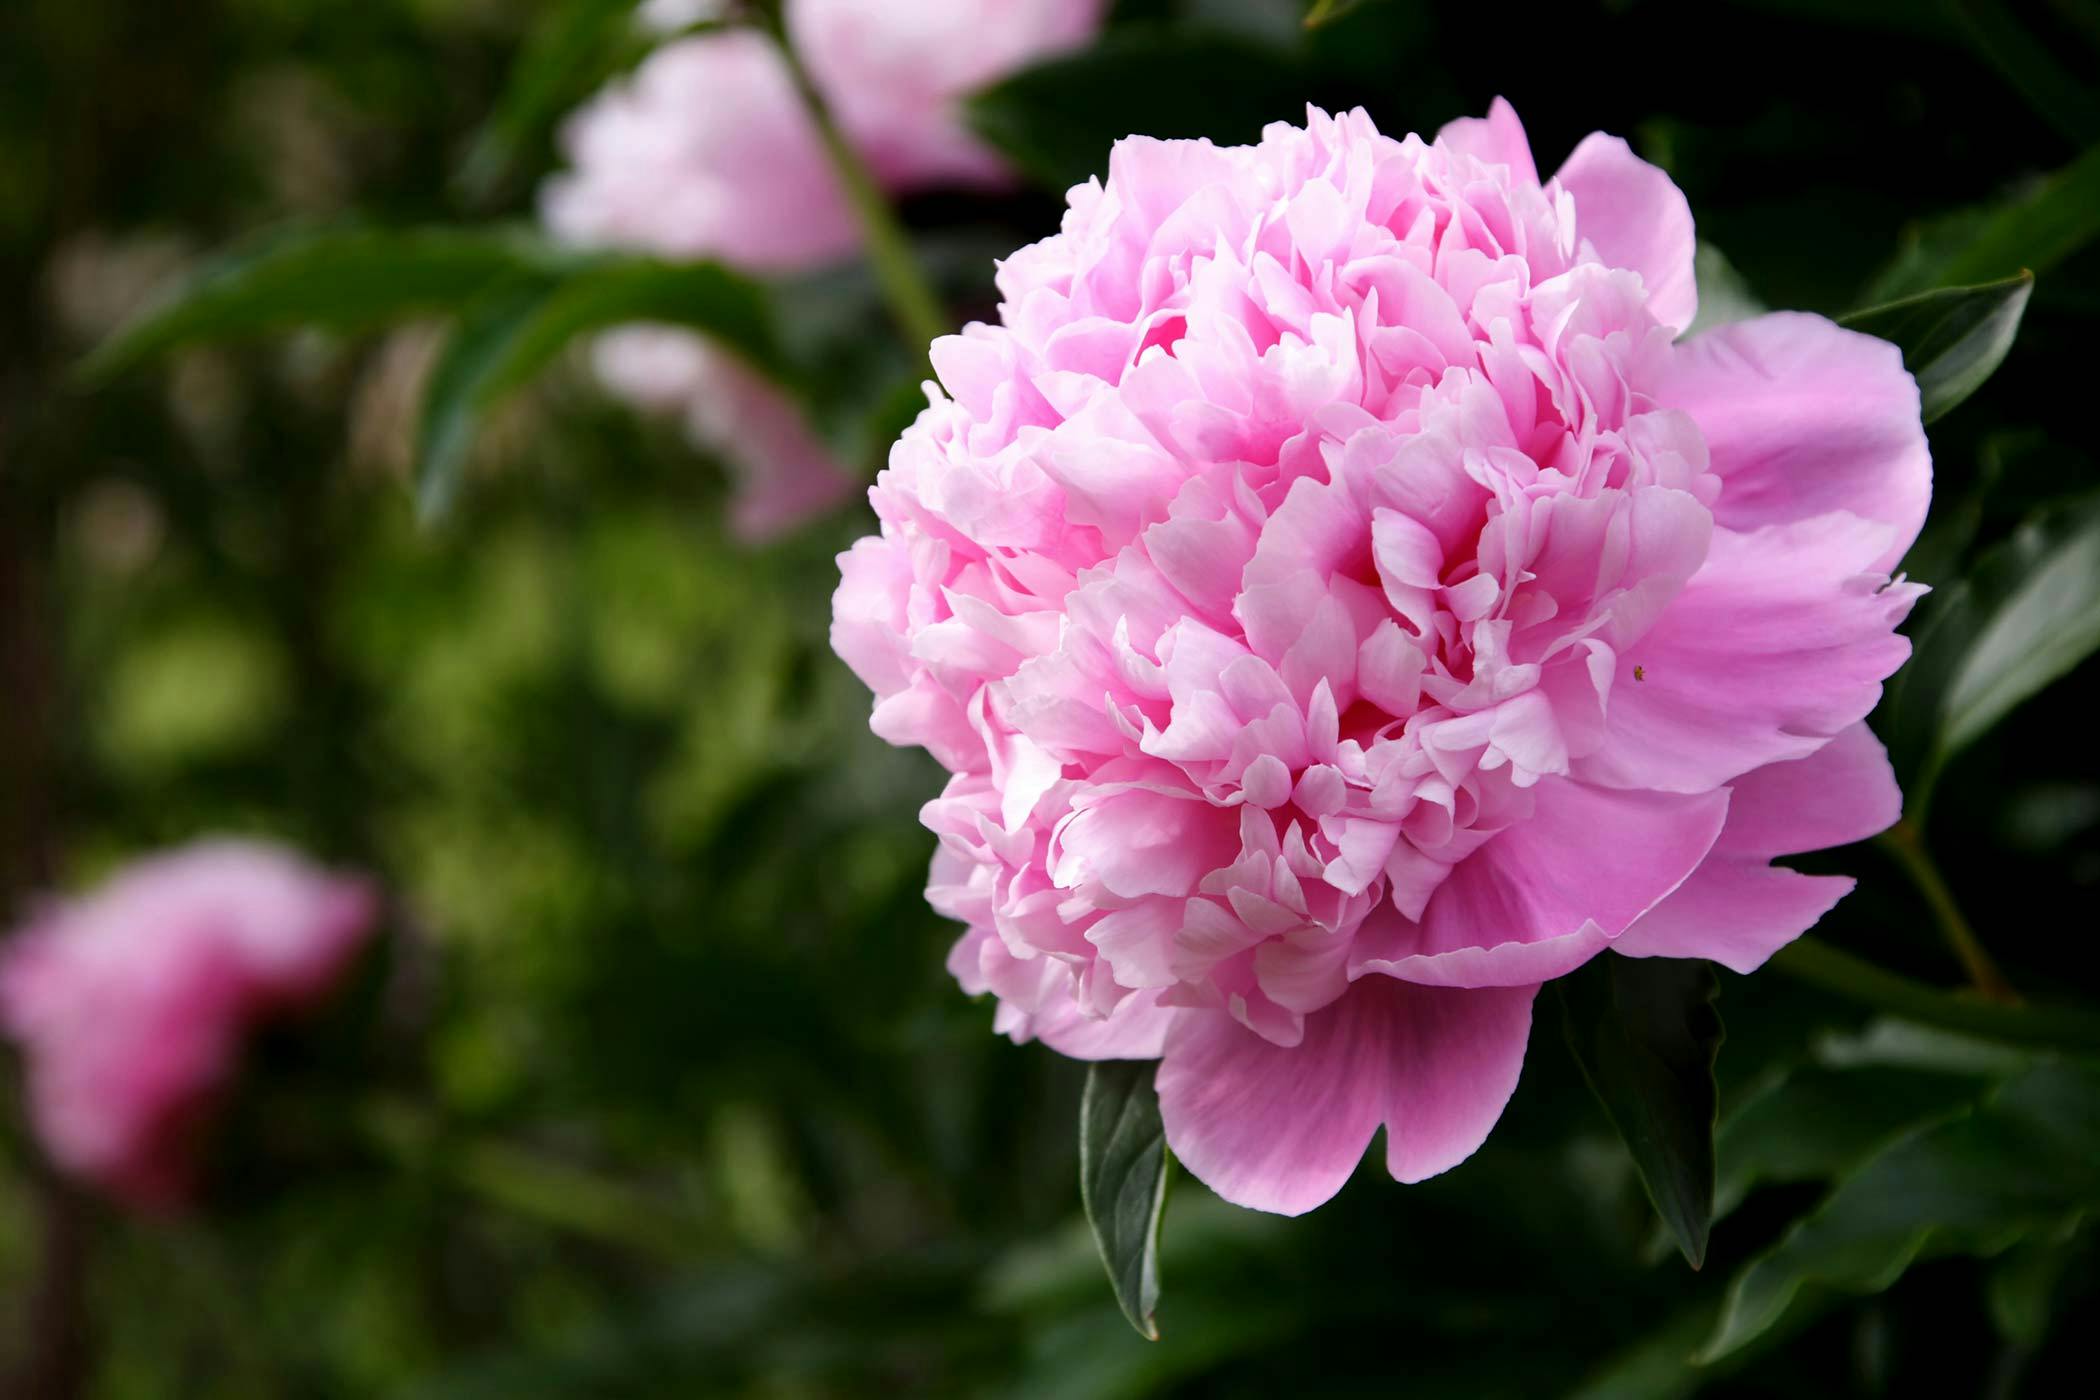 Are Peonies Poisonous To Cats